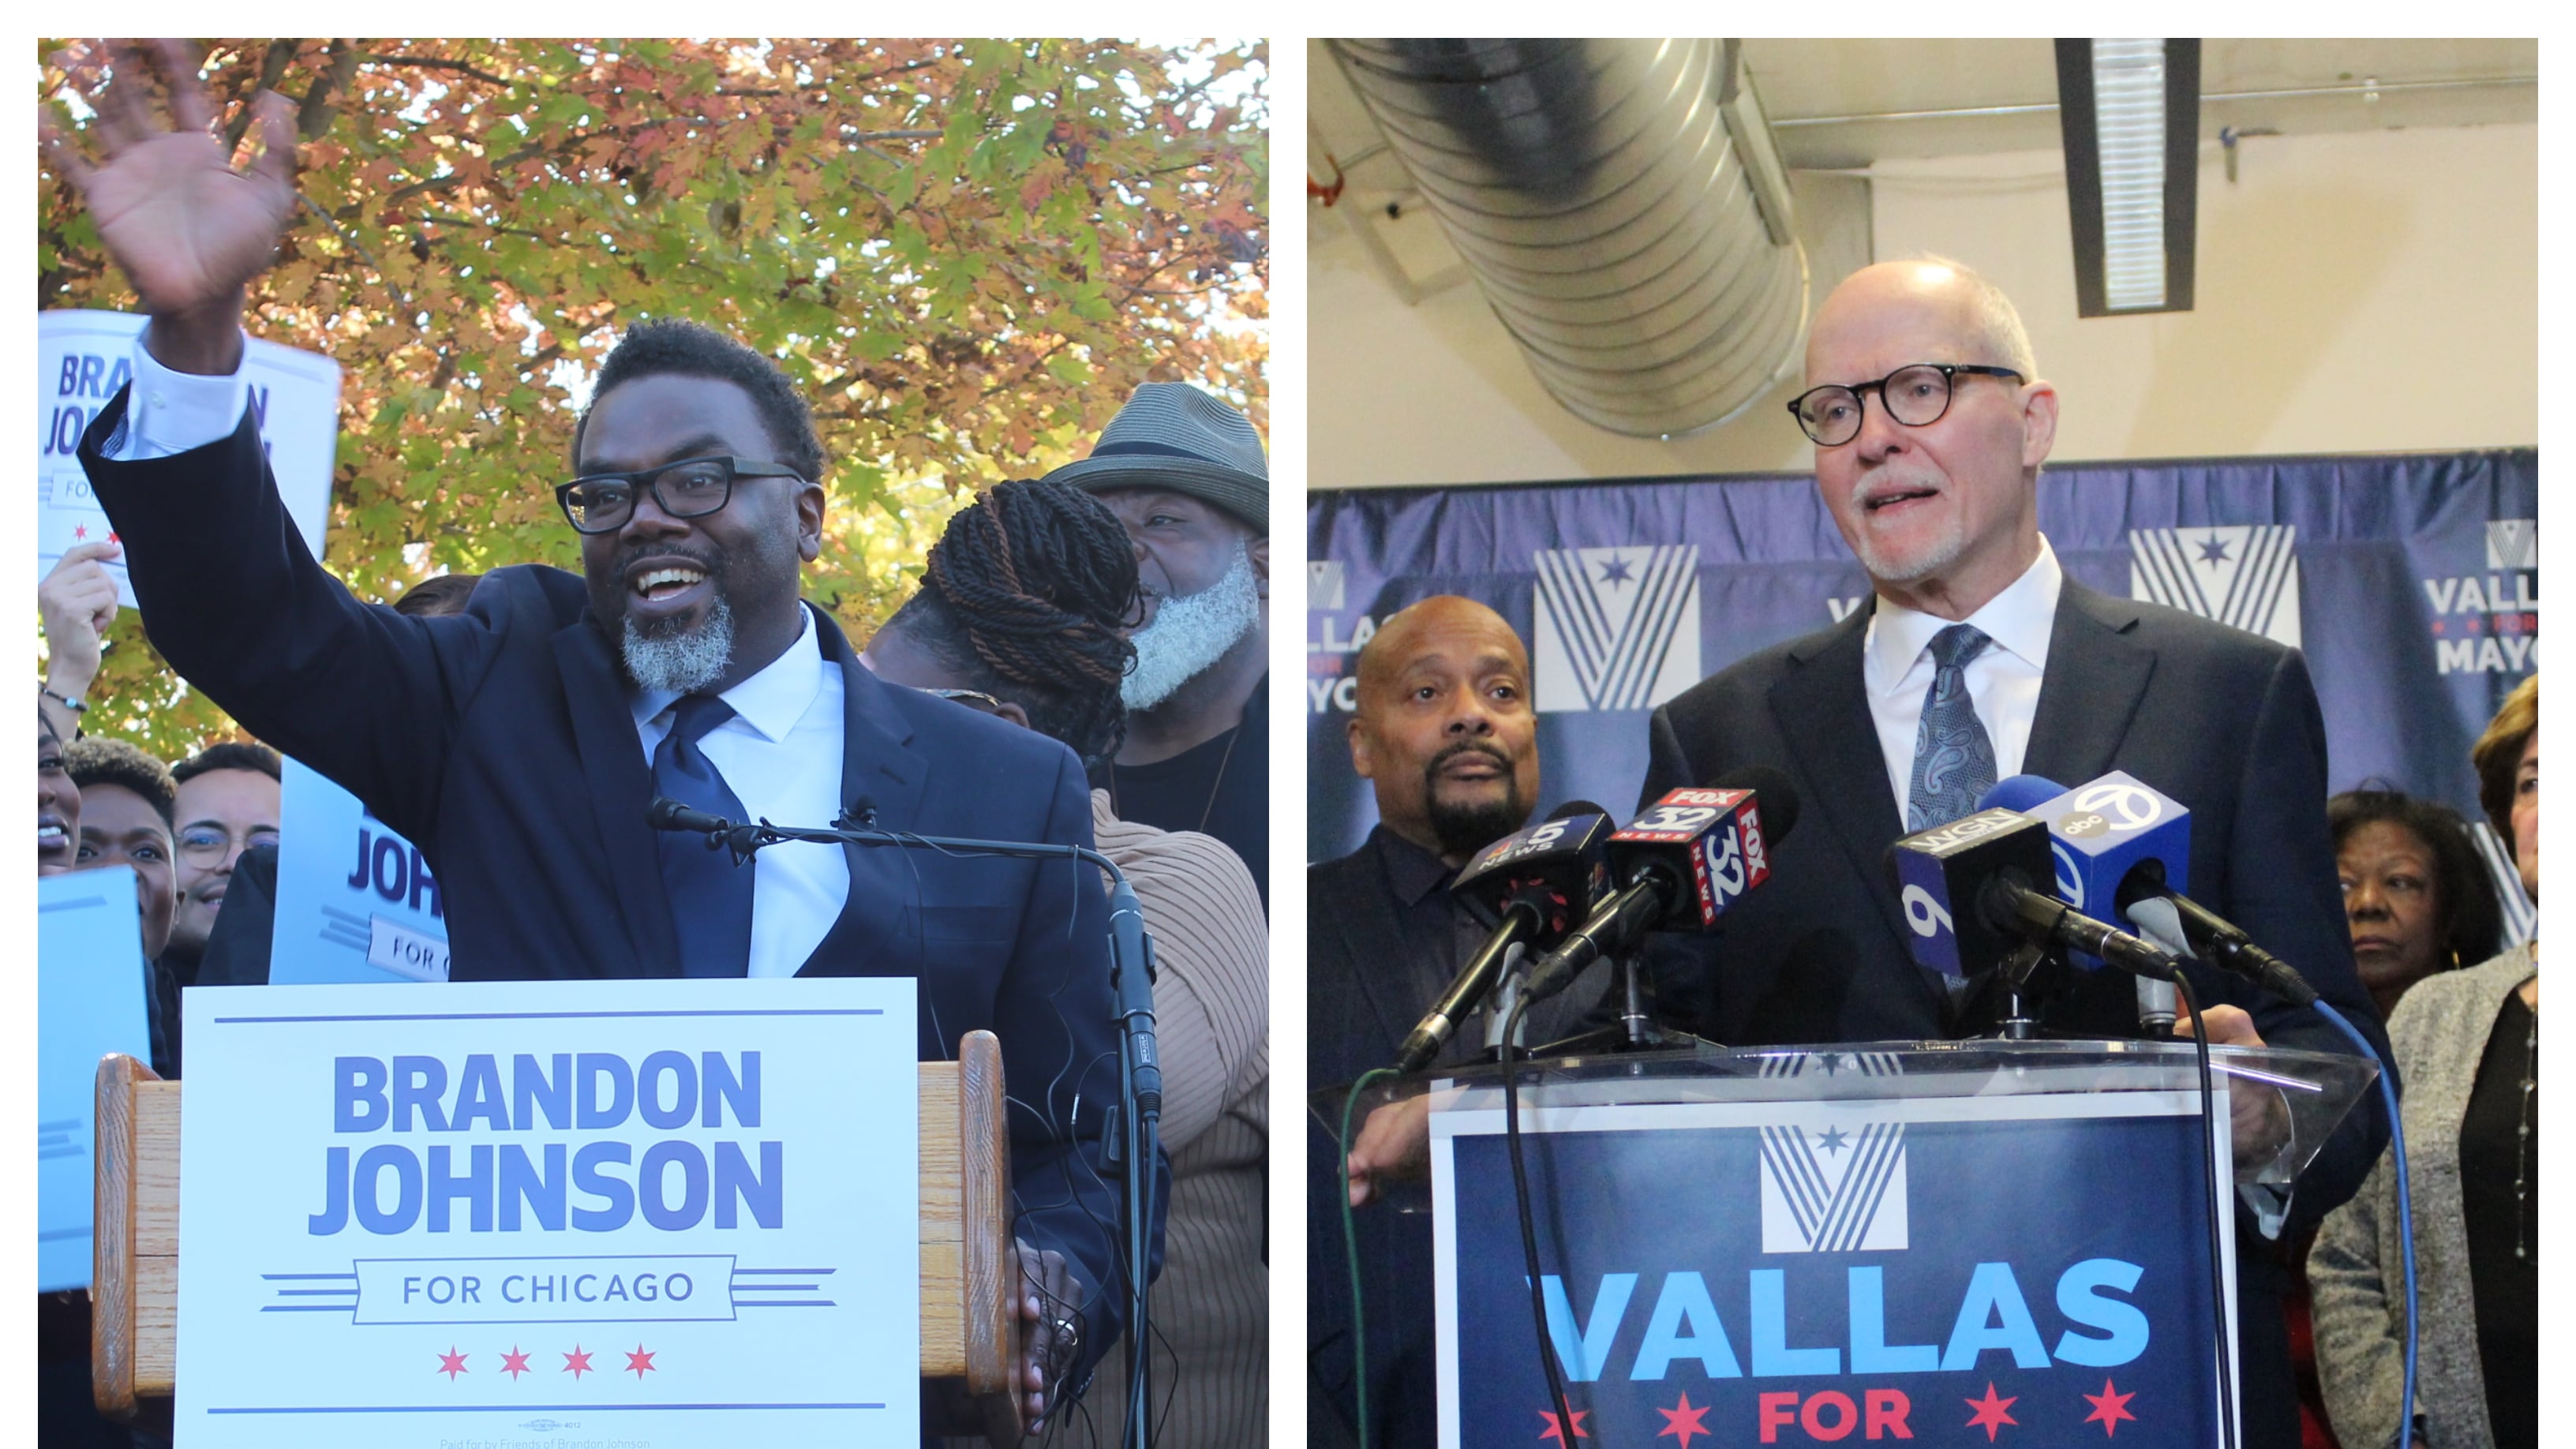 A collage of two men running for mayor of Chicago standing at podiums flanked by supporters.